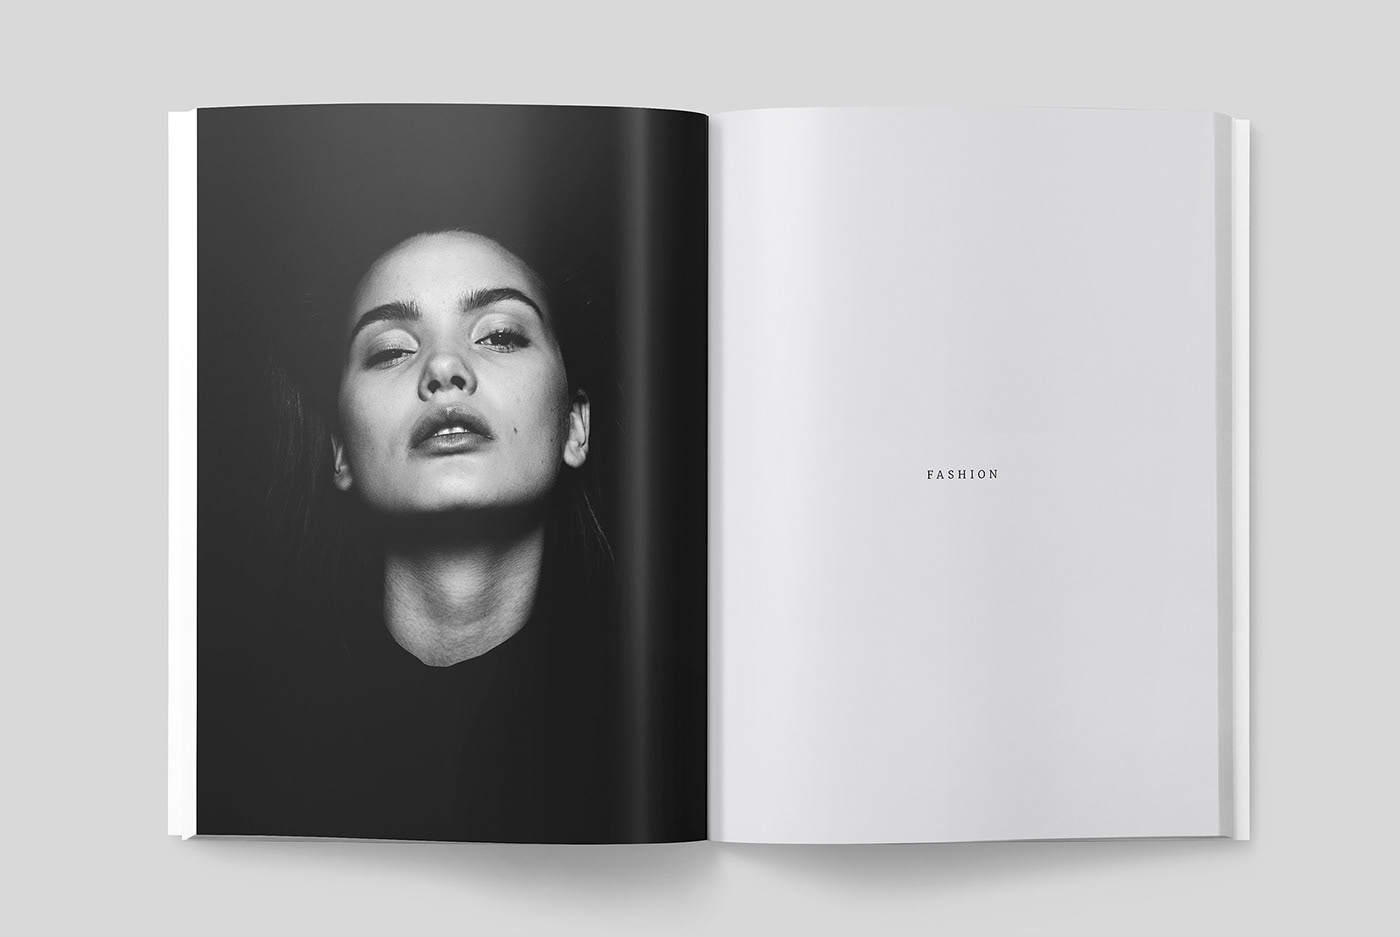 magazine template brochure modern contemporary minimal InDesign Layout architecture Travel